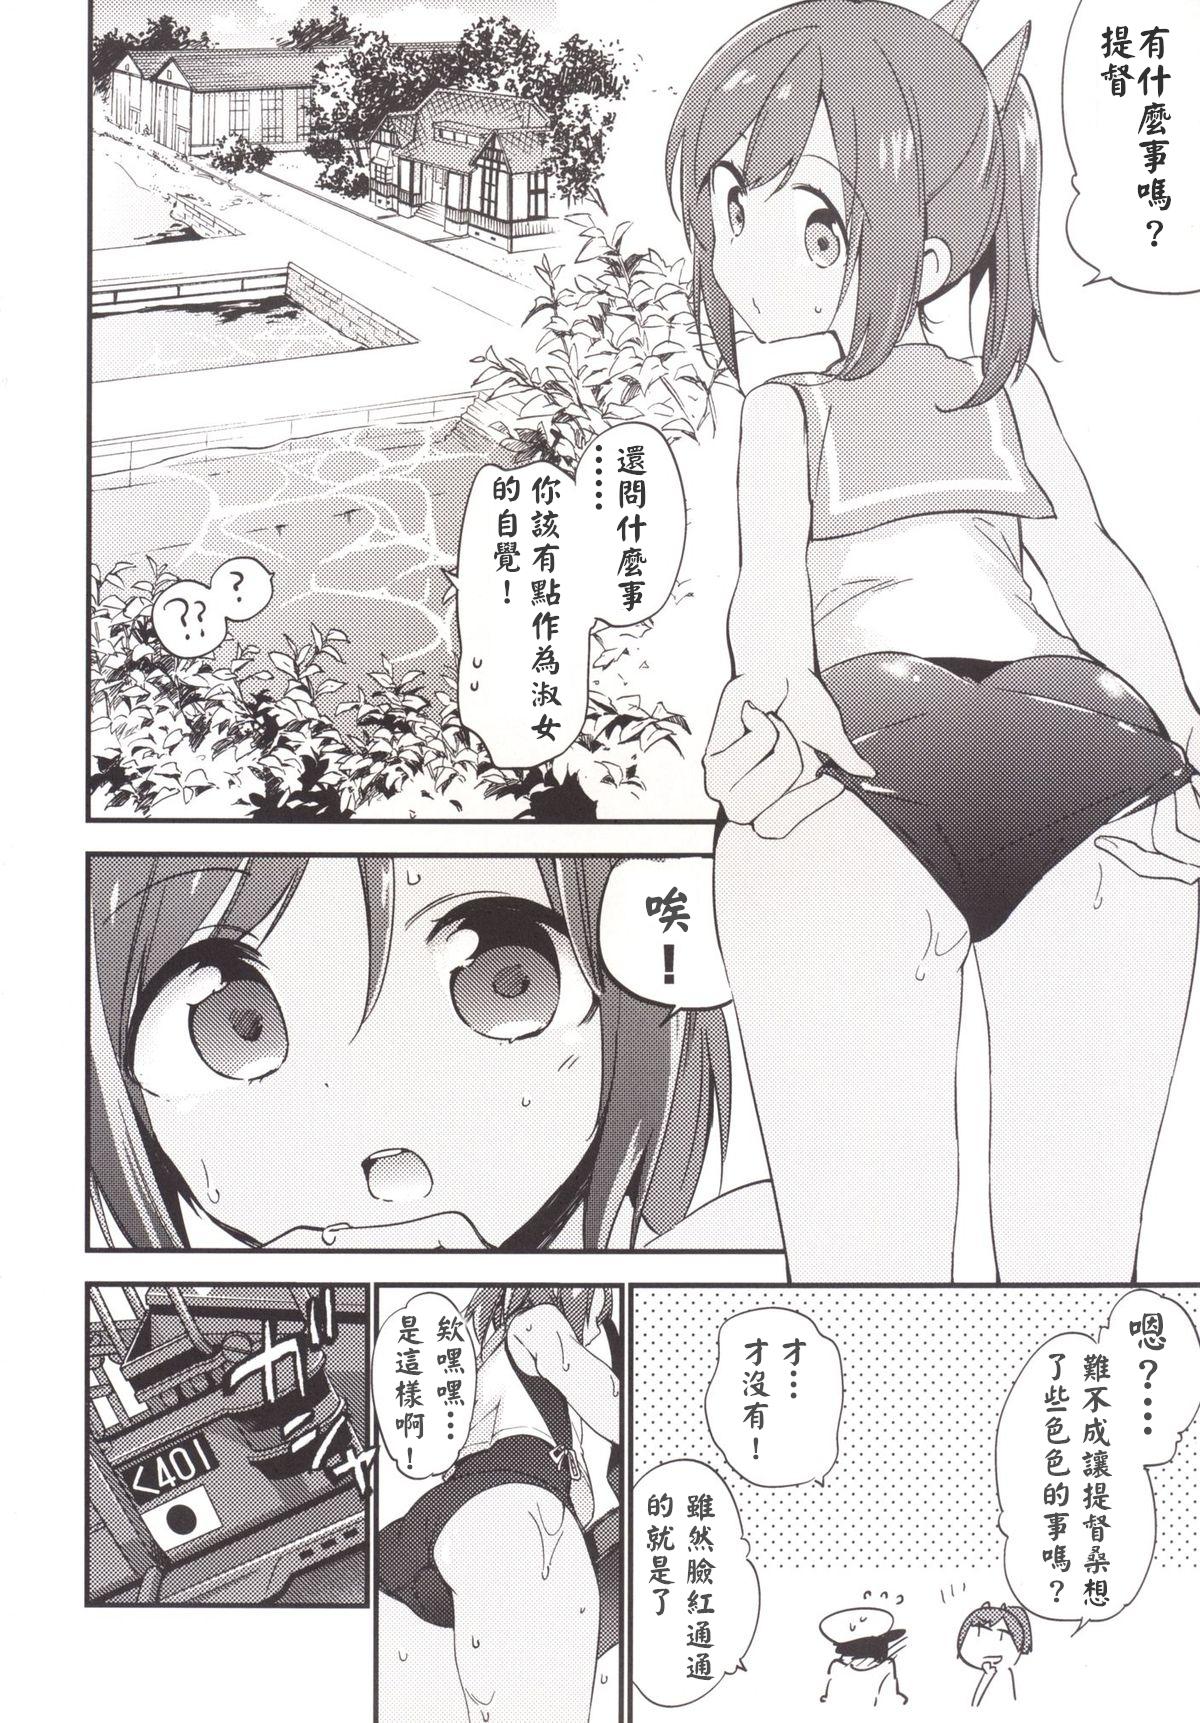 Safadinha 401-chan to Issho! - Kantai collection African - Page 6